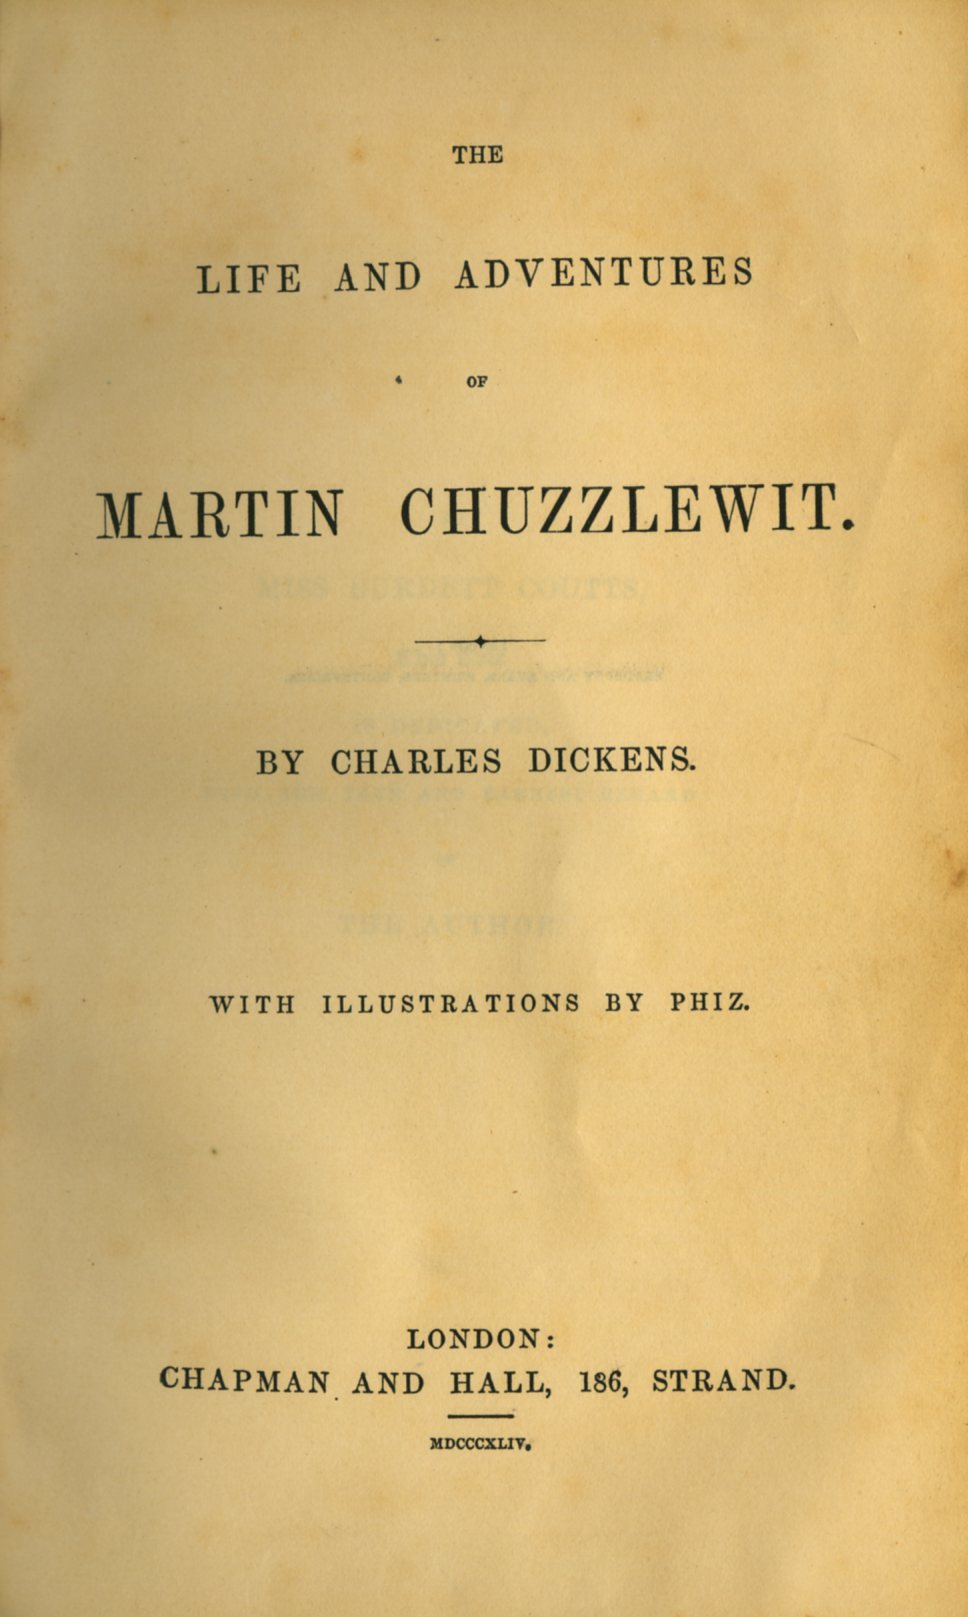 Dickens (Charles) Martin Chuzzlewit, 8vo L. (Chapman & Hall) 1844, First Edn., engd. frontis & add.